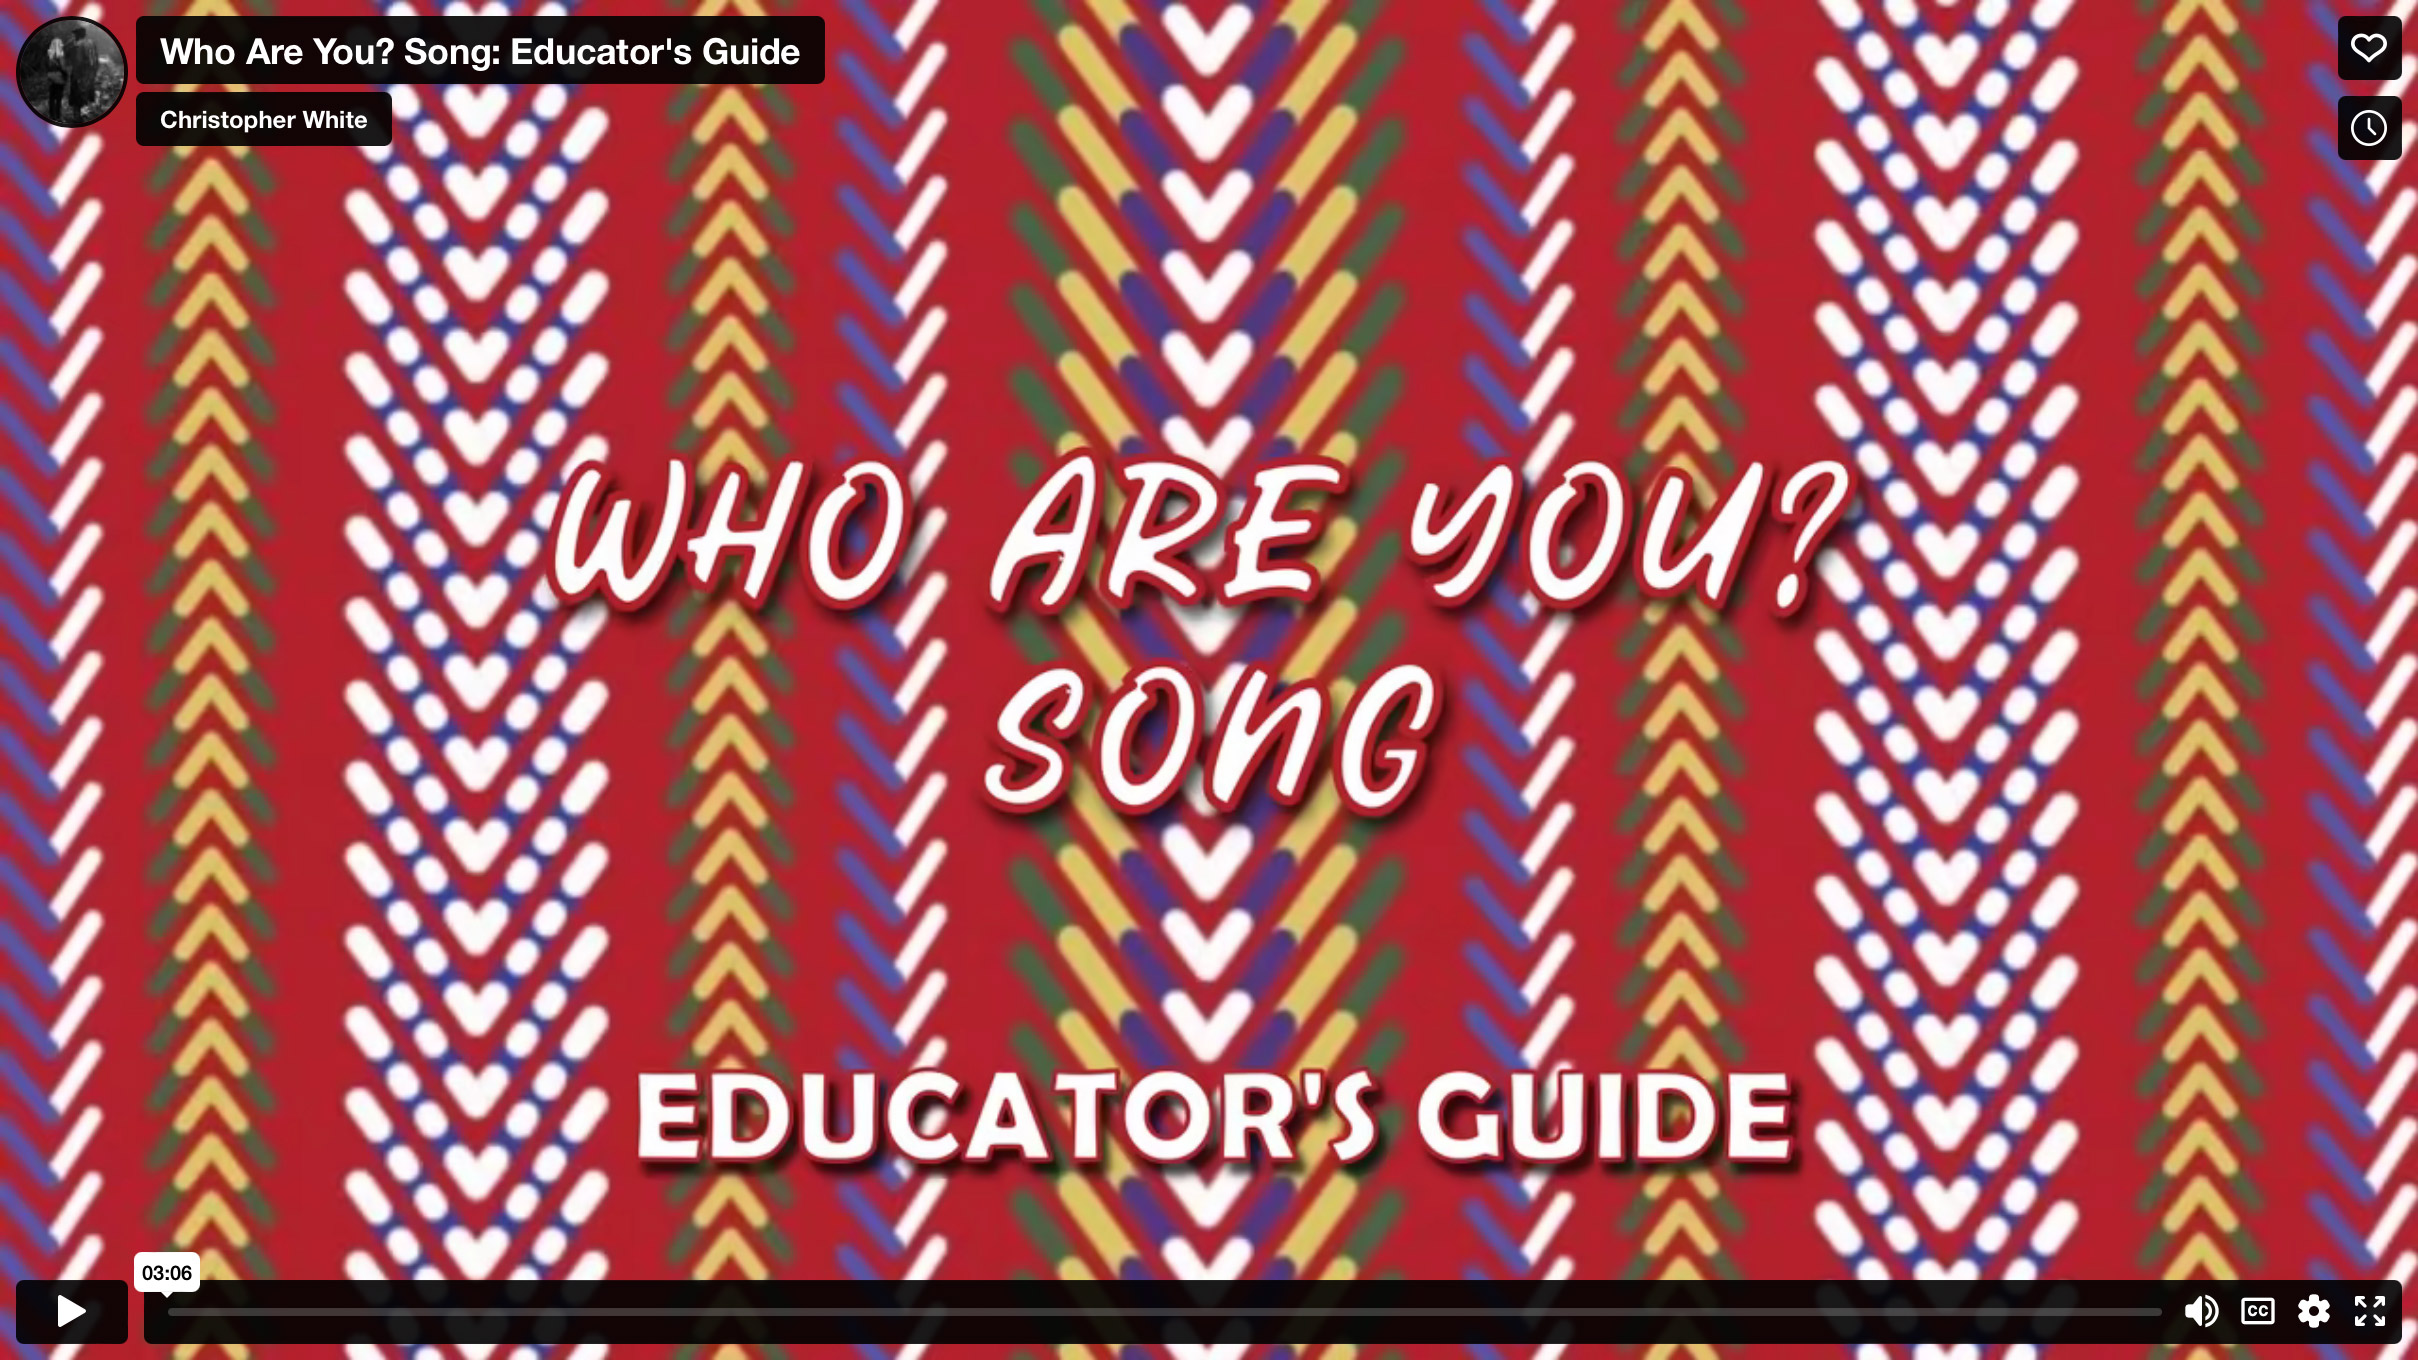 Instructional Video - Who Are You Song